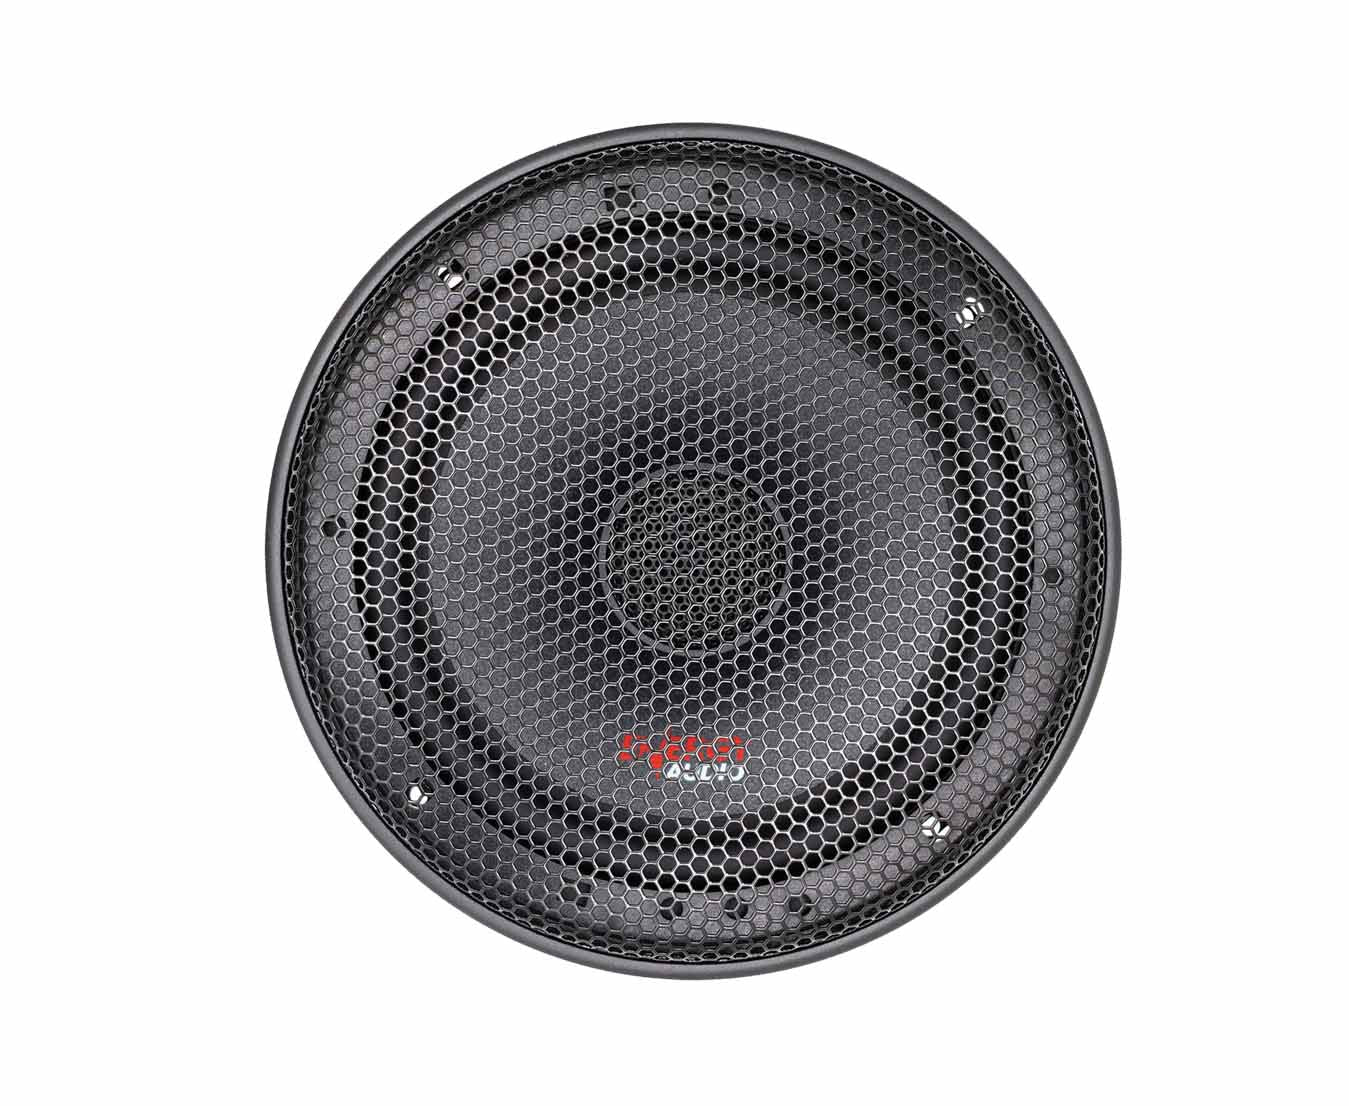 Energy Audio SQ652 375W 2-Way 70W RMS Coaxial 6.5" Speakers (Free Delivery Excluded)